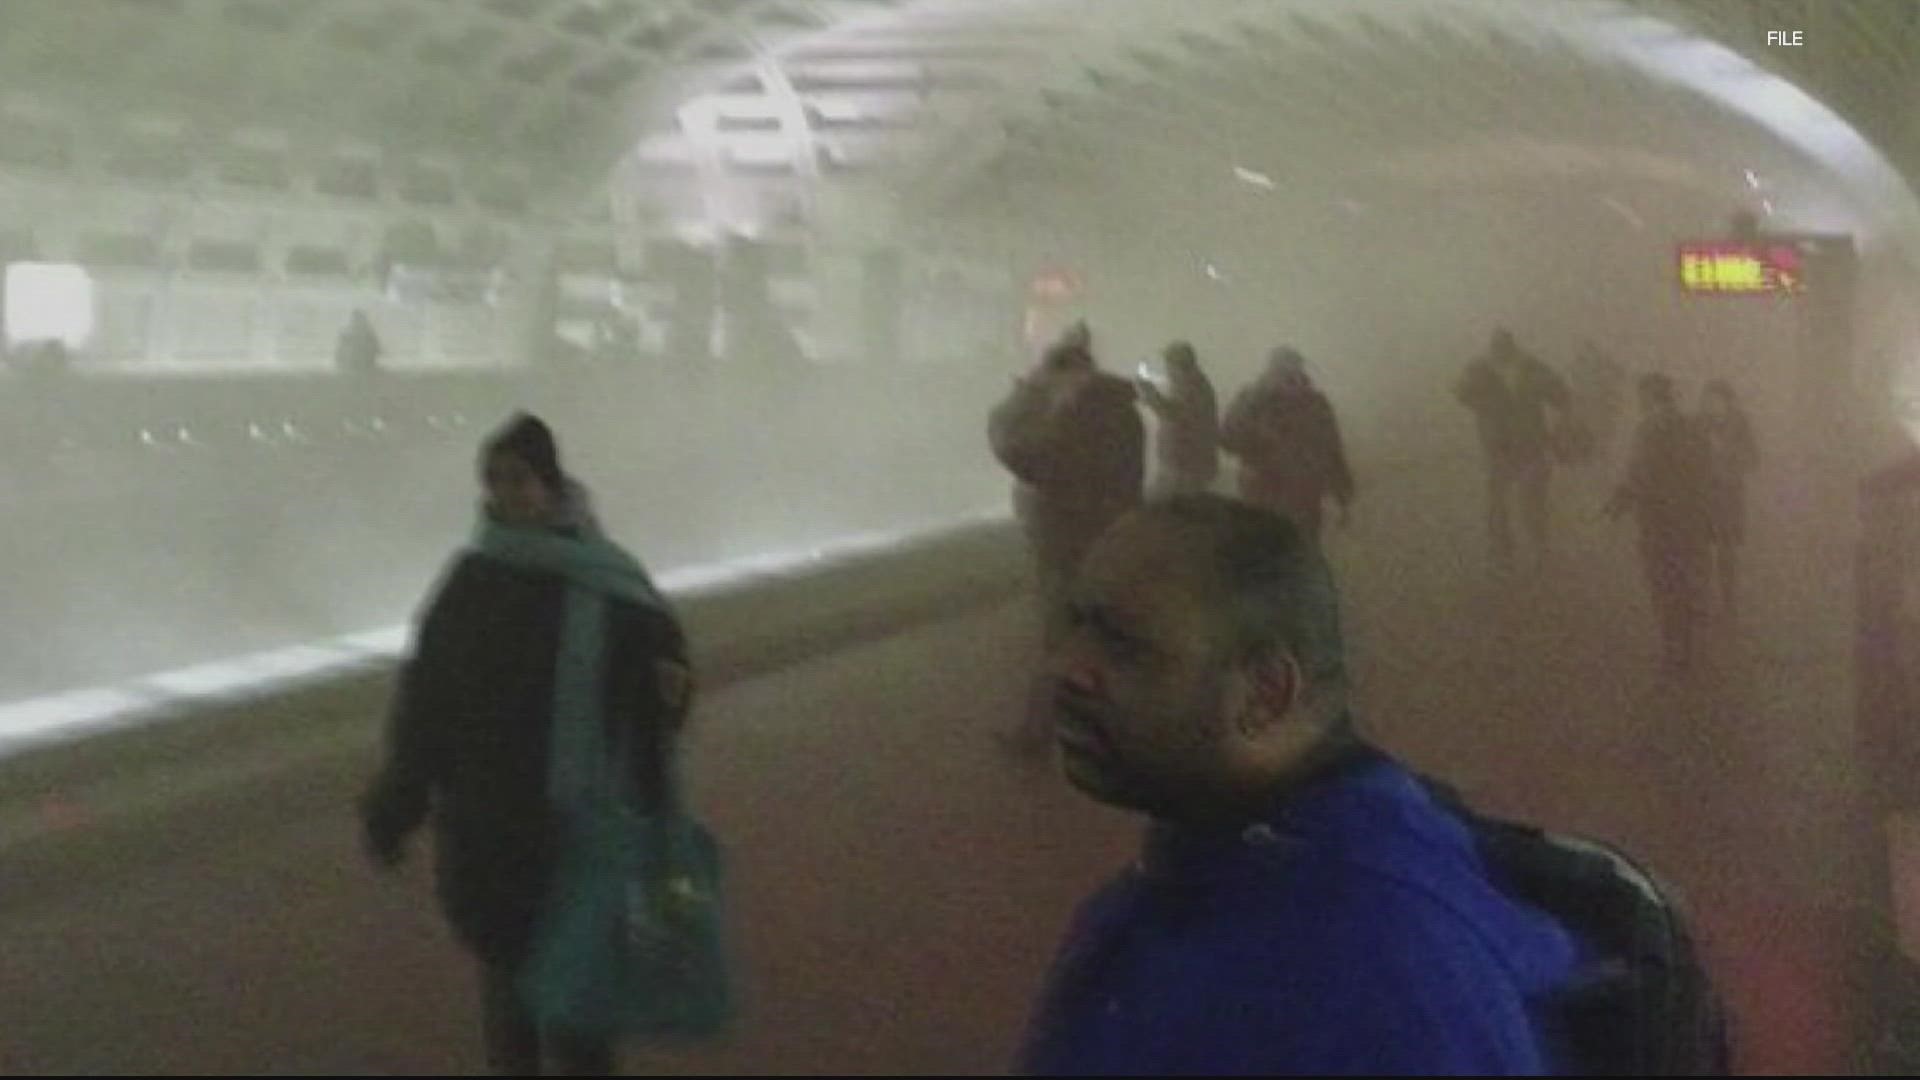 The communication breakdown during this deadly smoke incident at L'Enfant plaza back in 2015 - - is STILL a problem today.